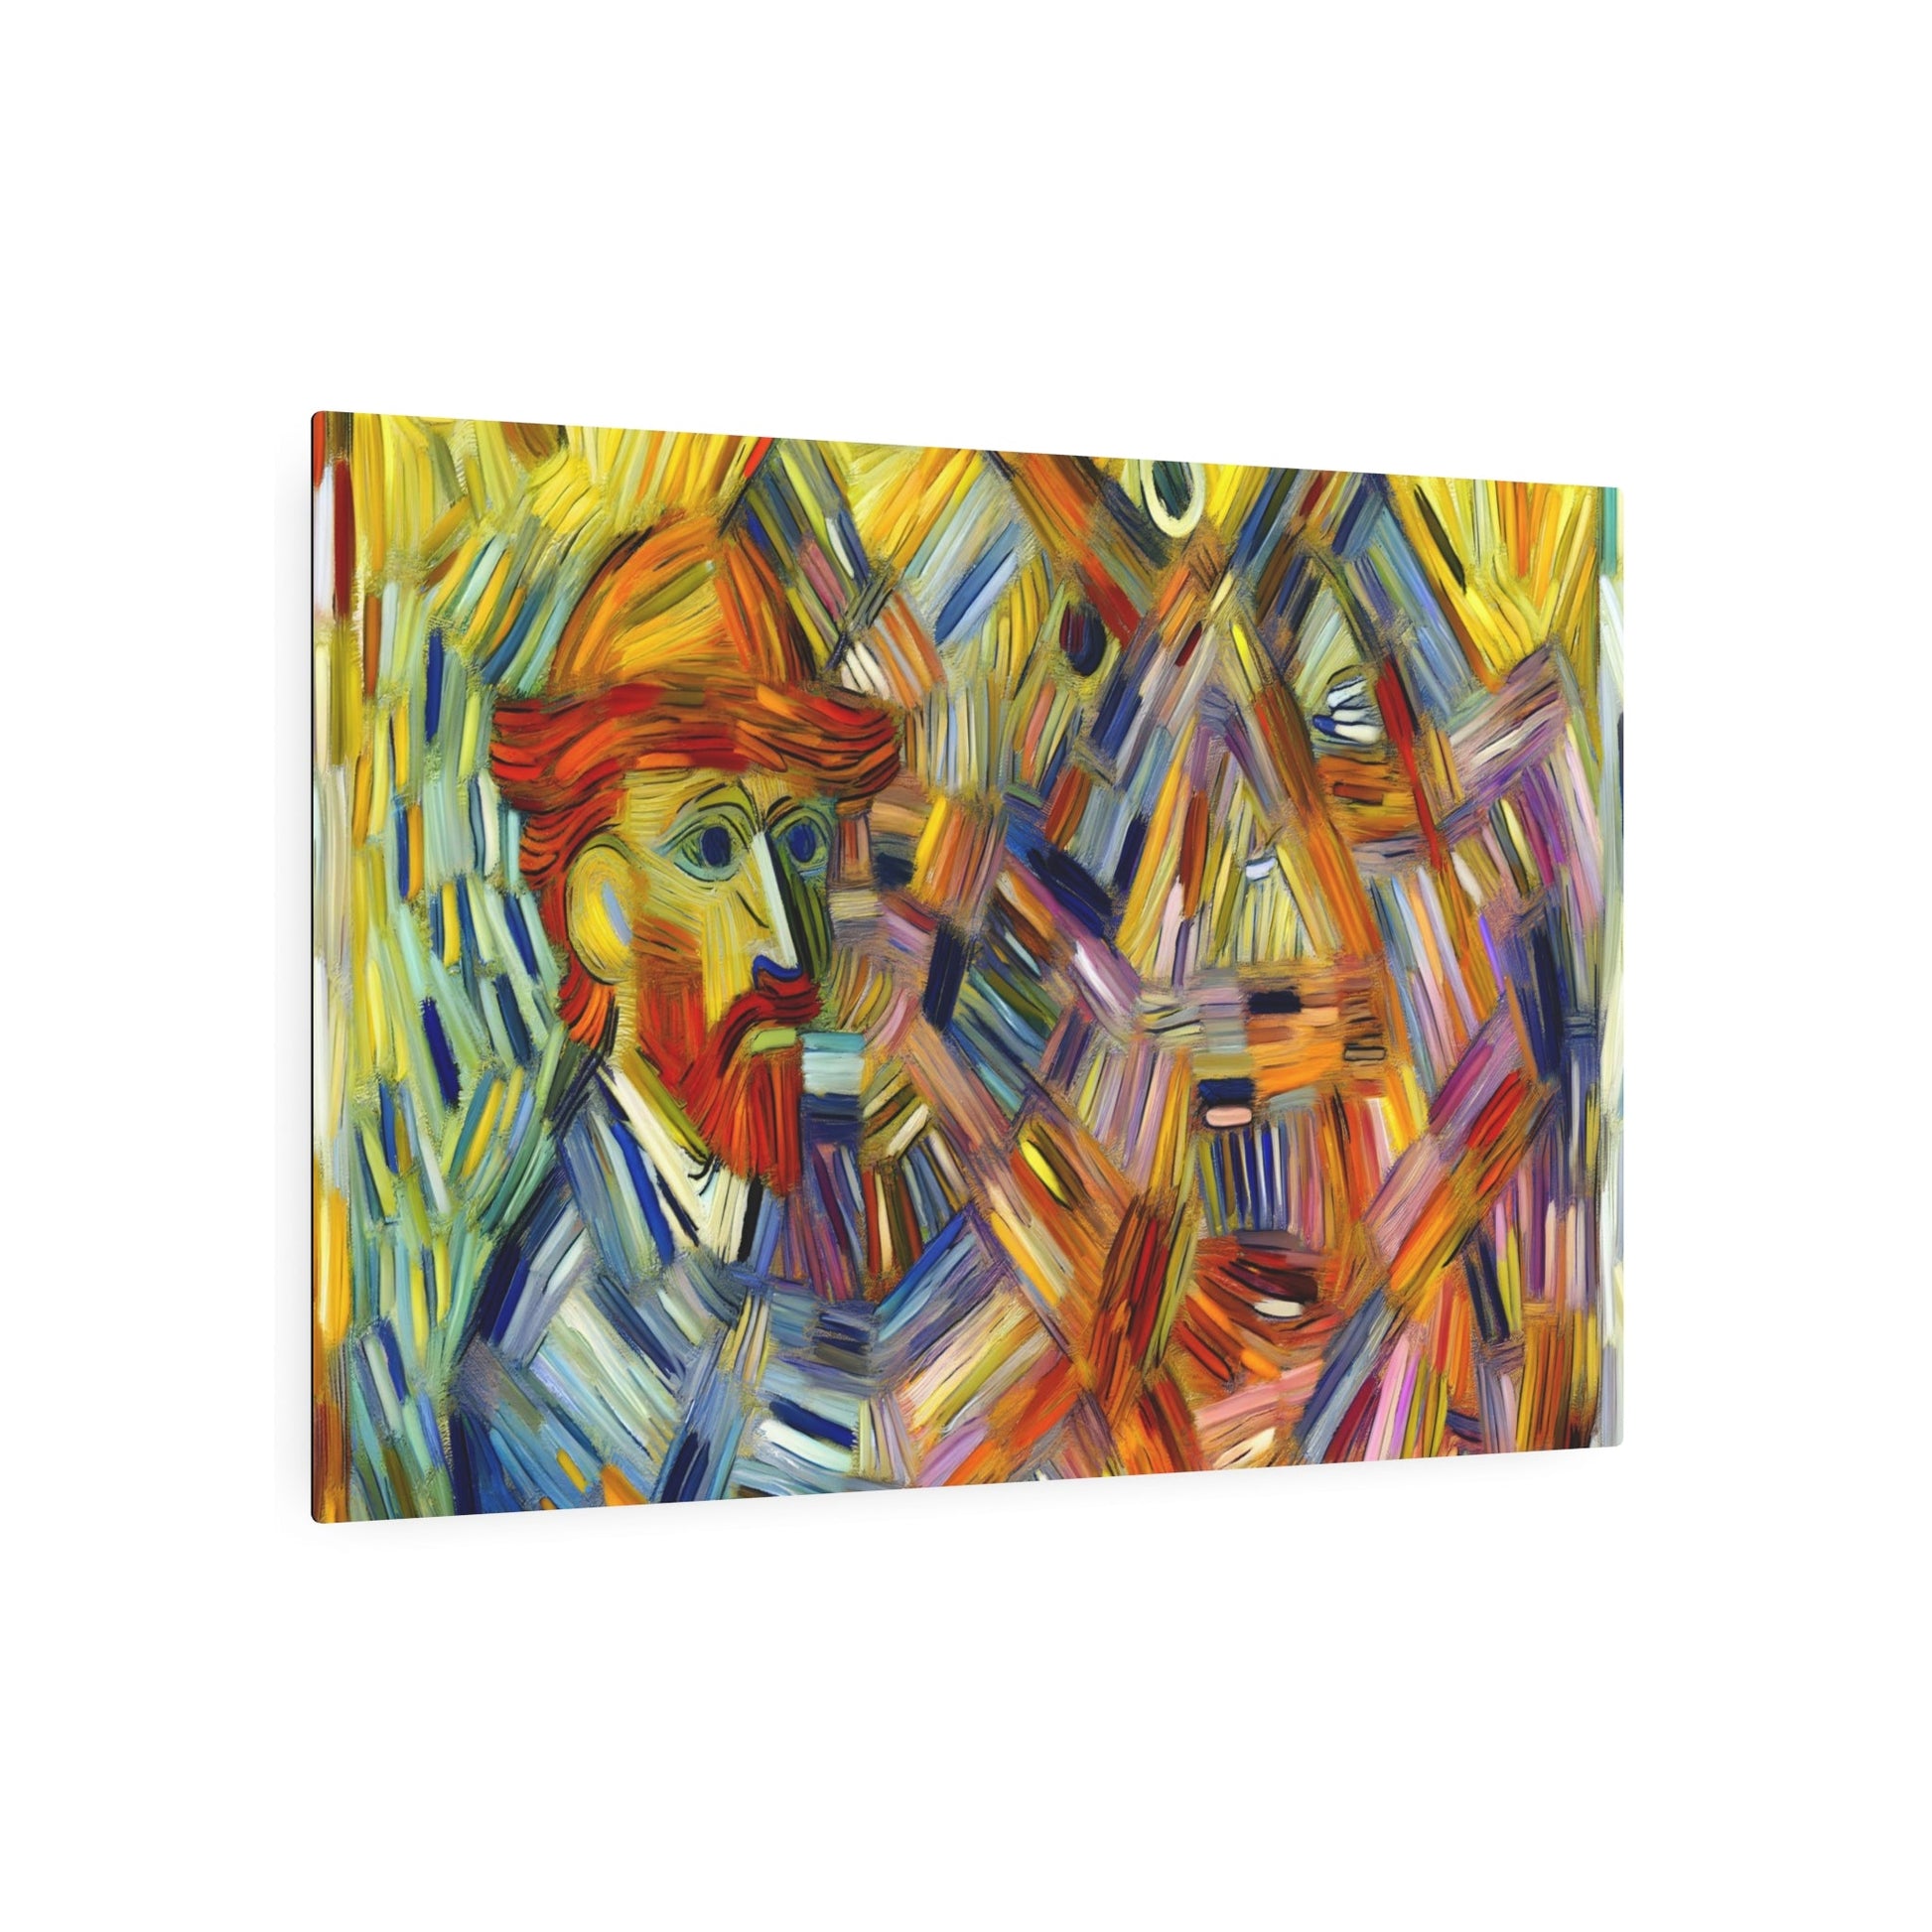 Metal Poster Art | "Post-Impressionist Style Artwork with Vivid Colors and Geometric Forms - Western Art Styles Collection" - Metal Poster Art 36″ x 24″ (Horizontal) 0.12''